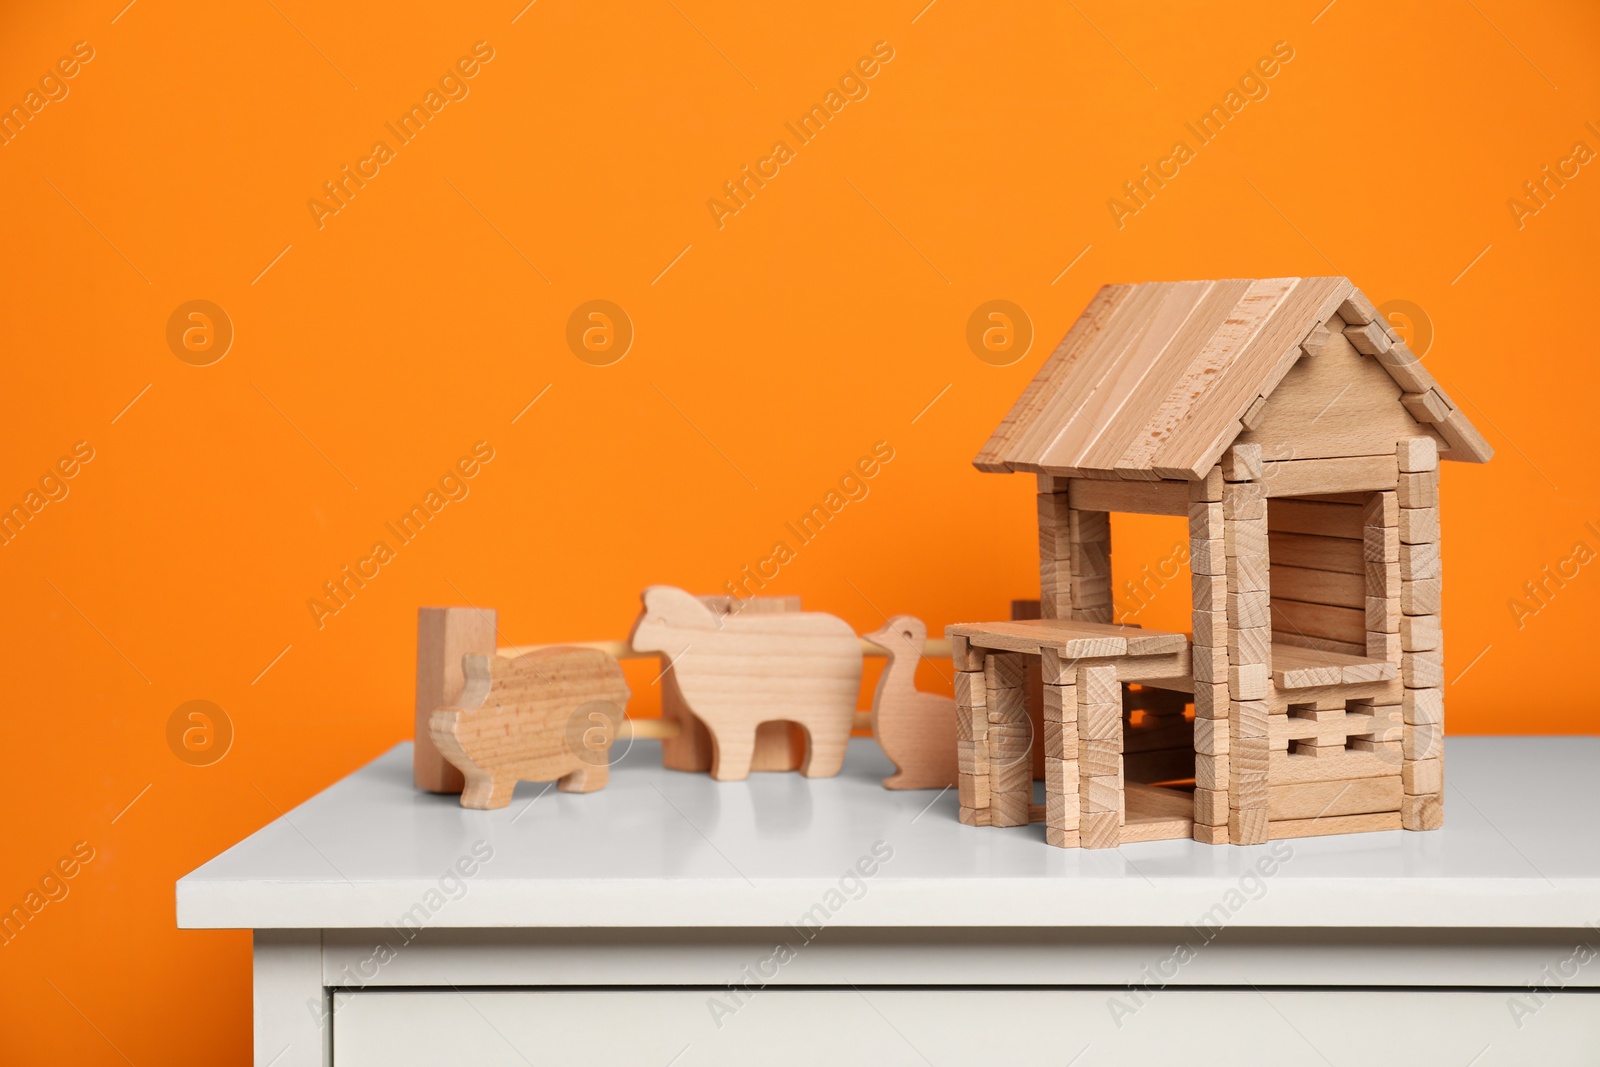 Photo of Wooden house, animals and fence on white chest of drawers near orange wall. Children's toys